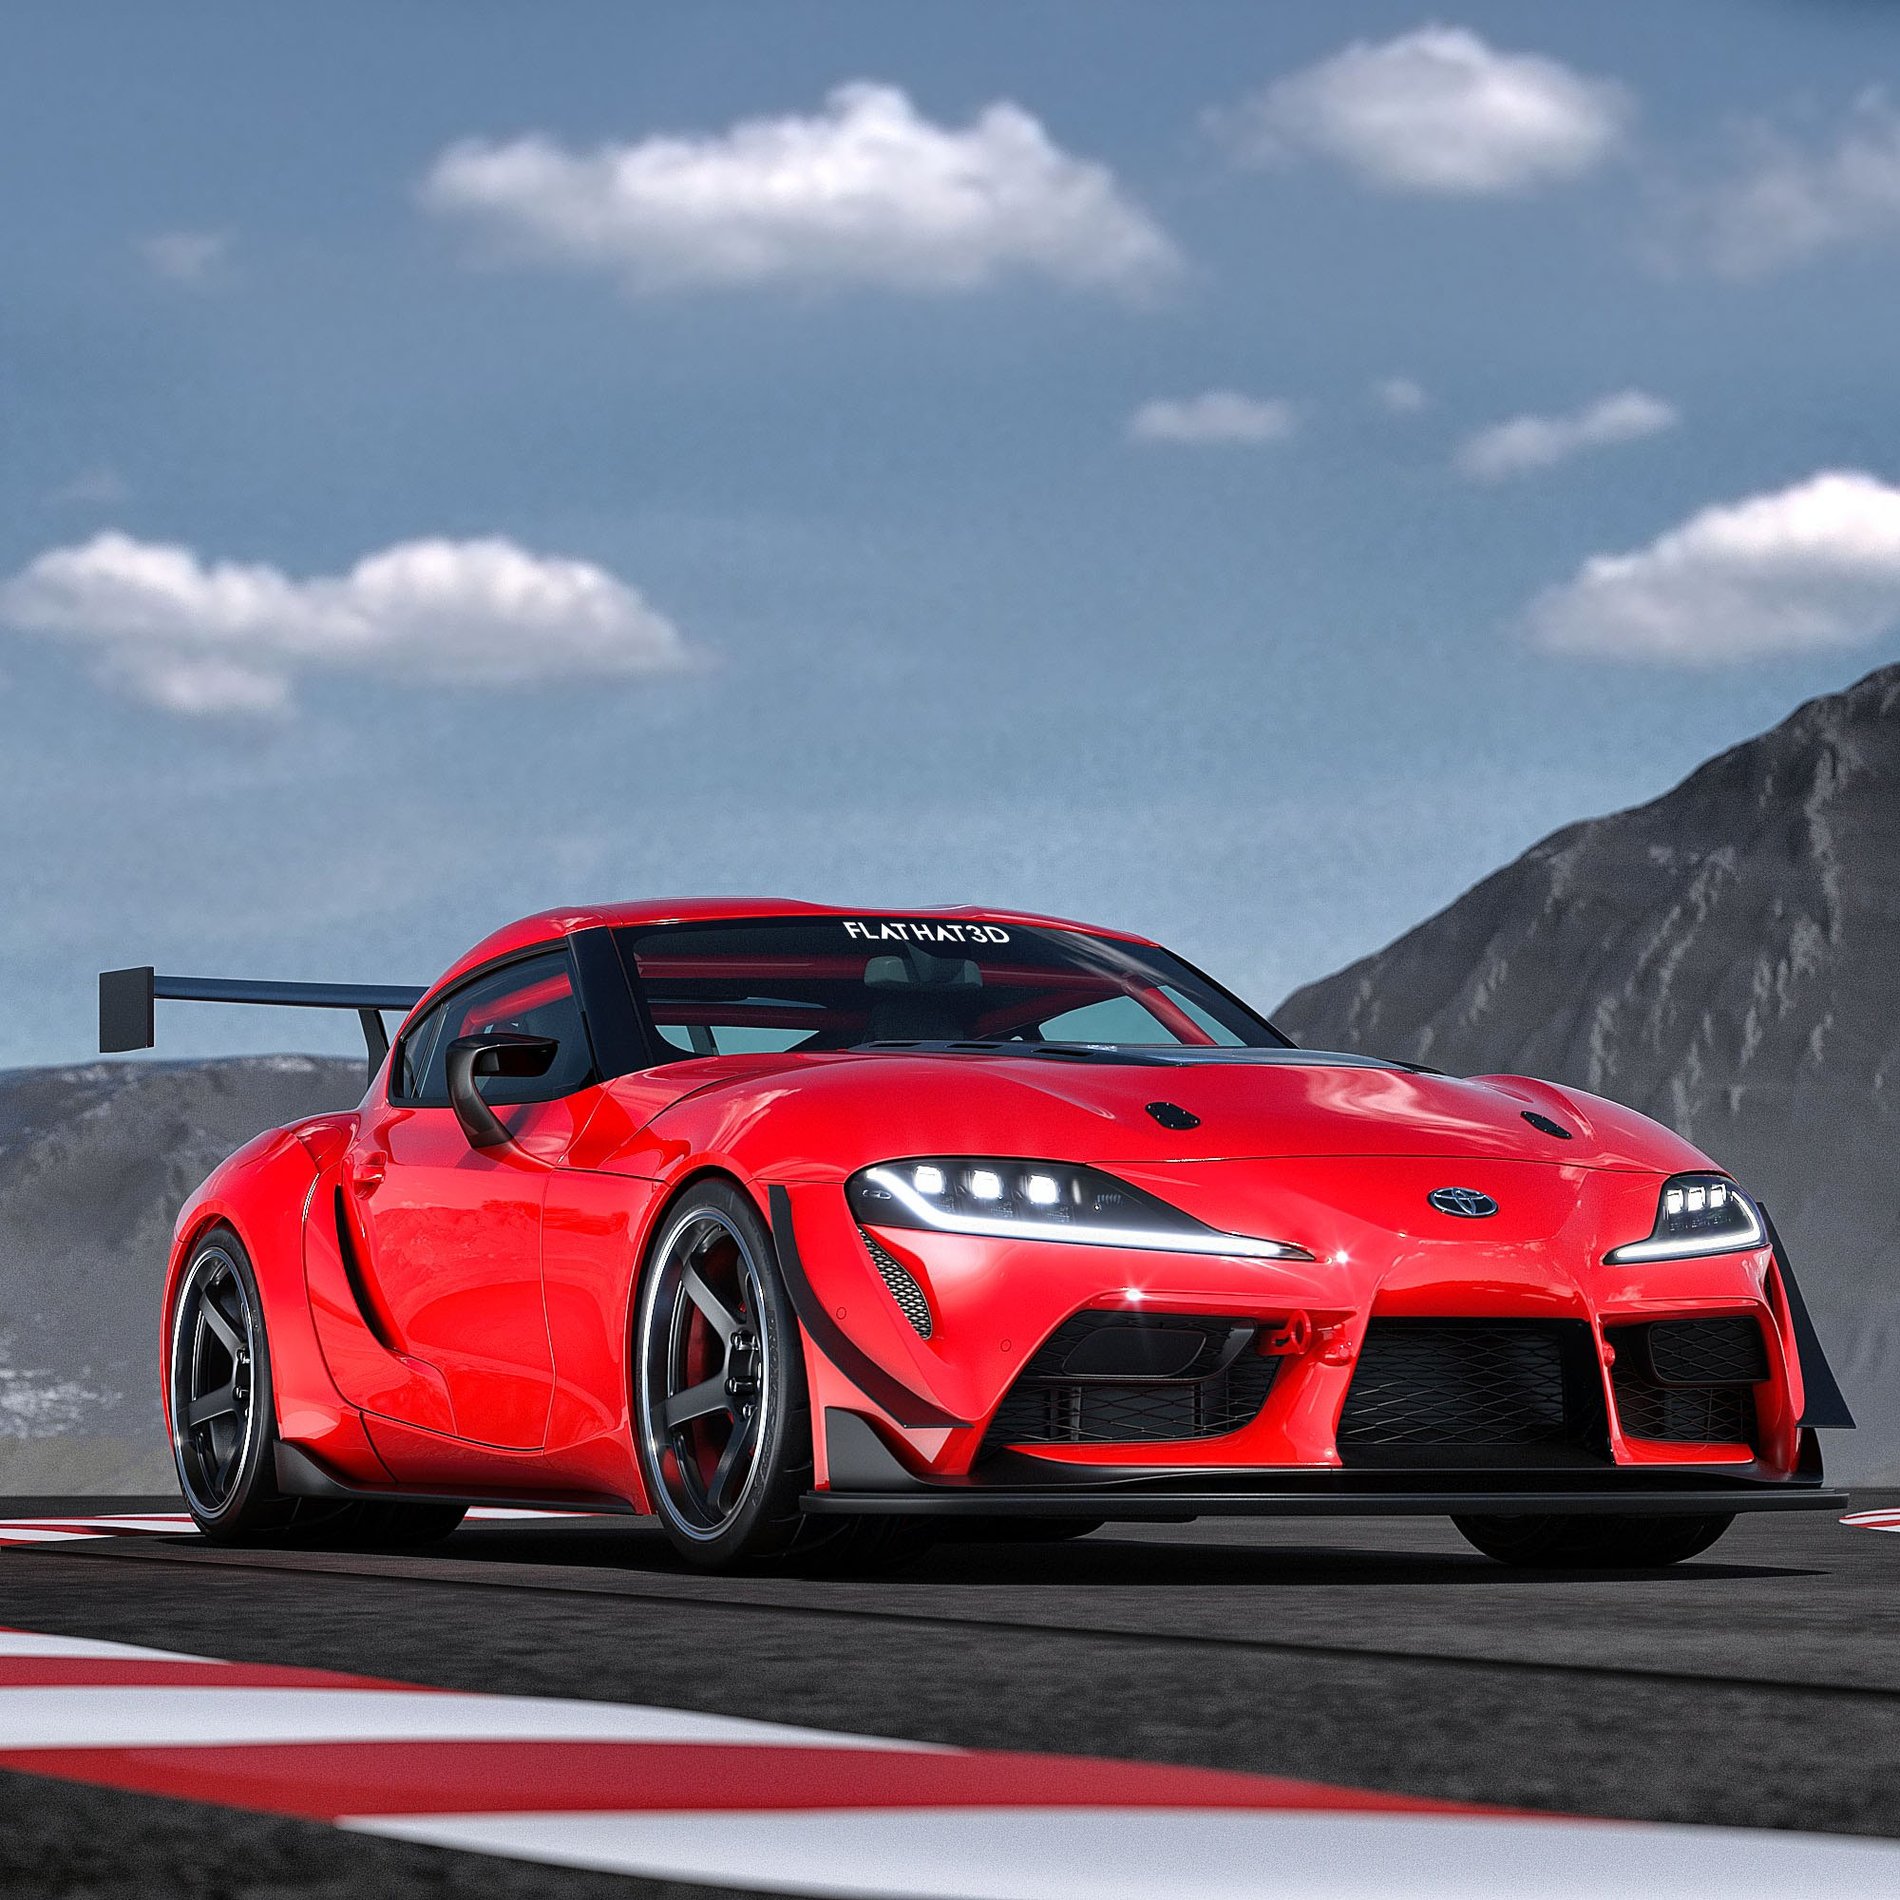 Could We Expect After Market Ft1 Body Kits For The New Supra